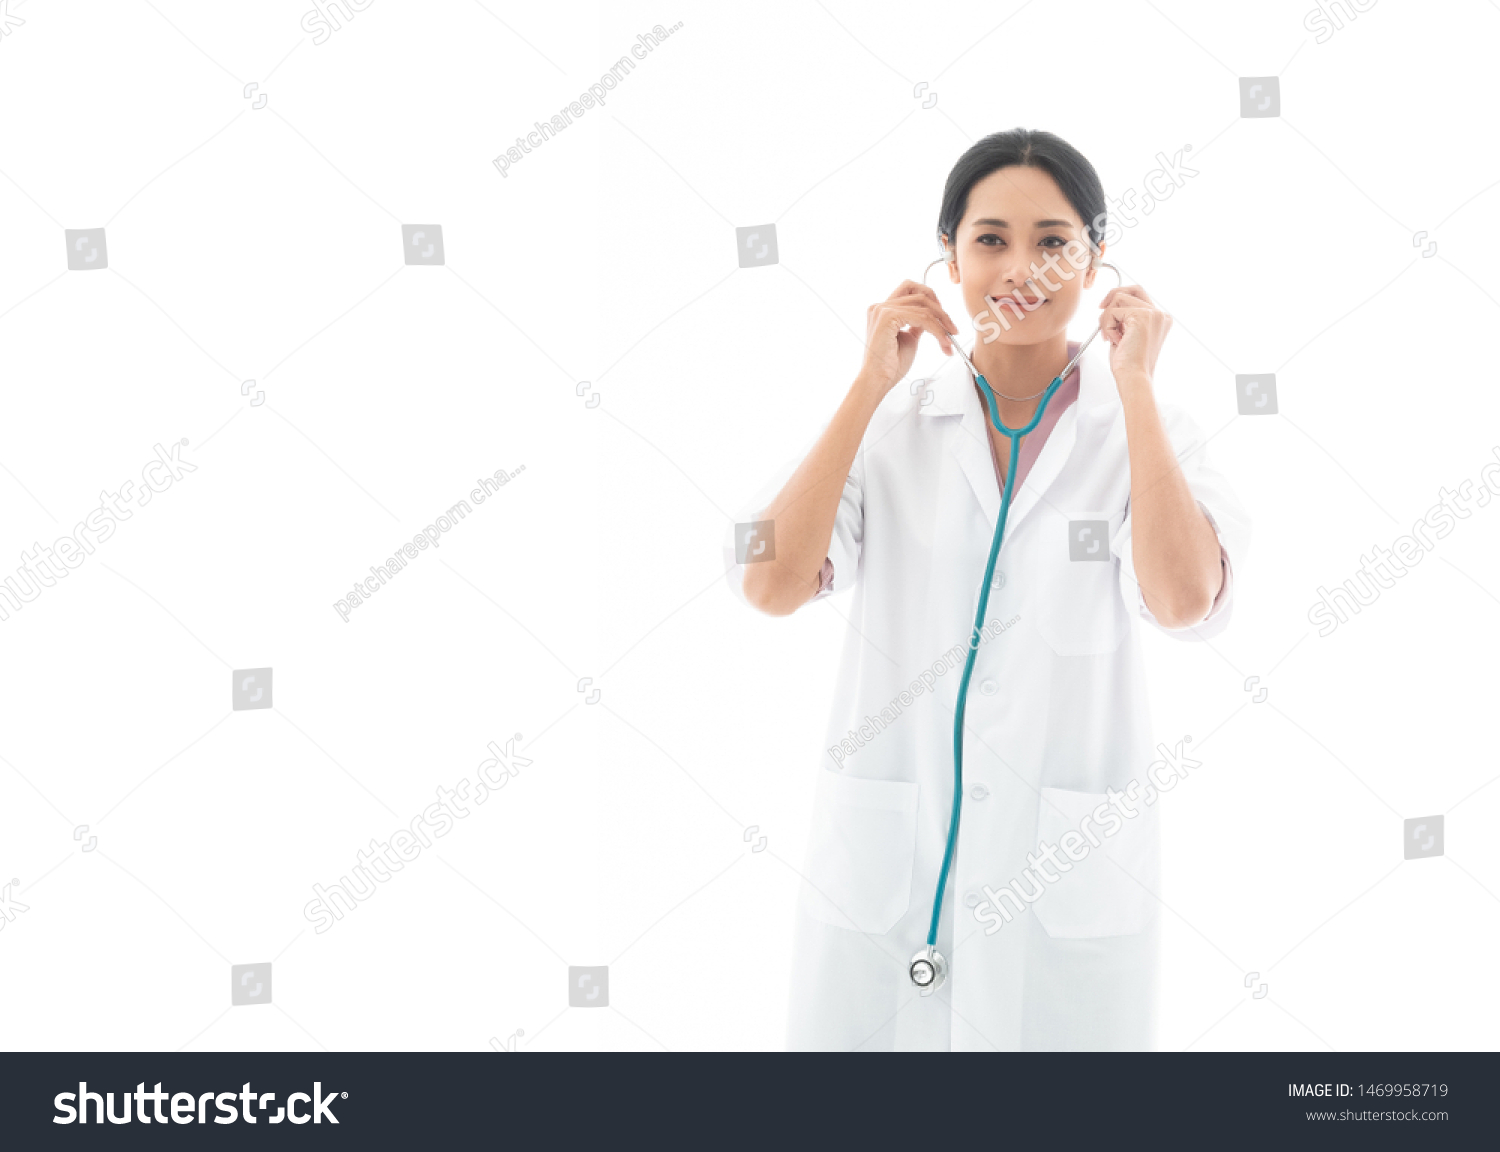 female doctor working in medical health care, She wearing a stethoscope.concept medical health care. #1469958719